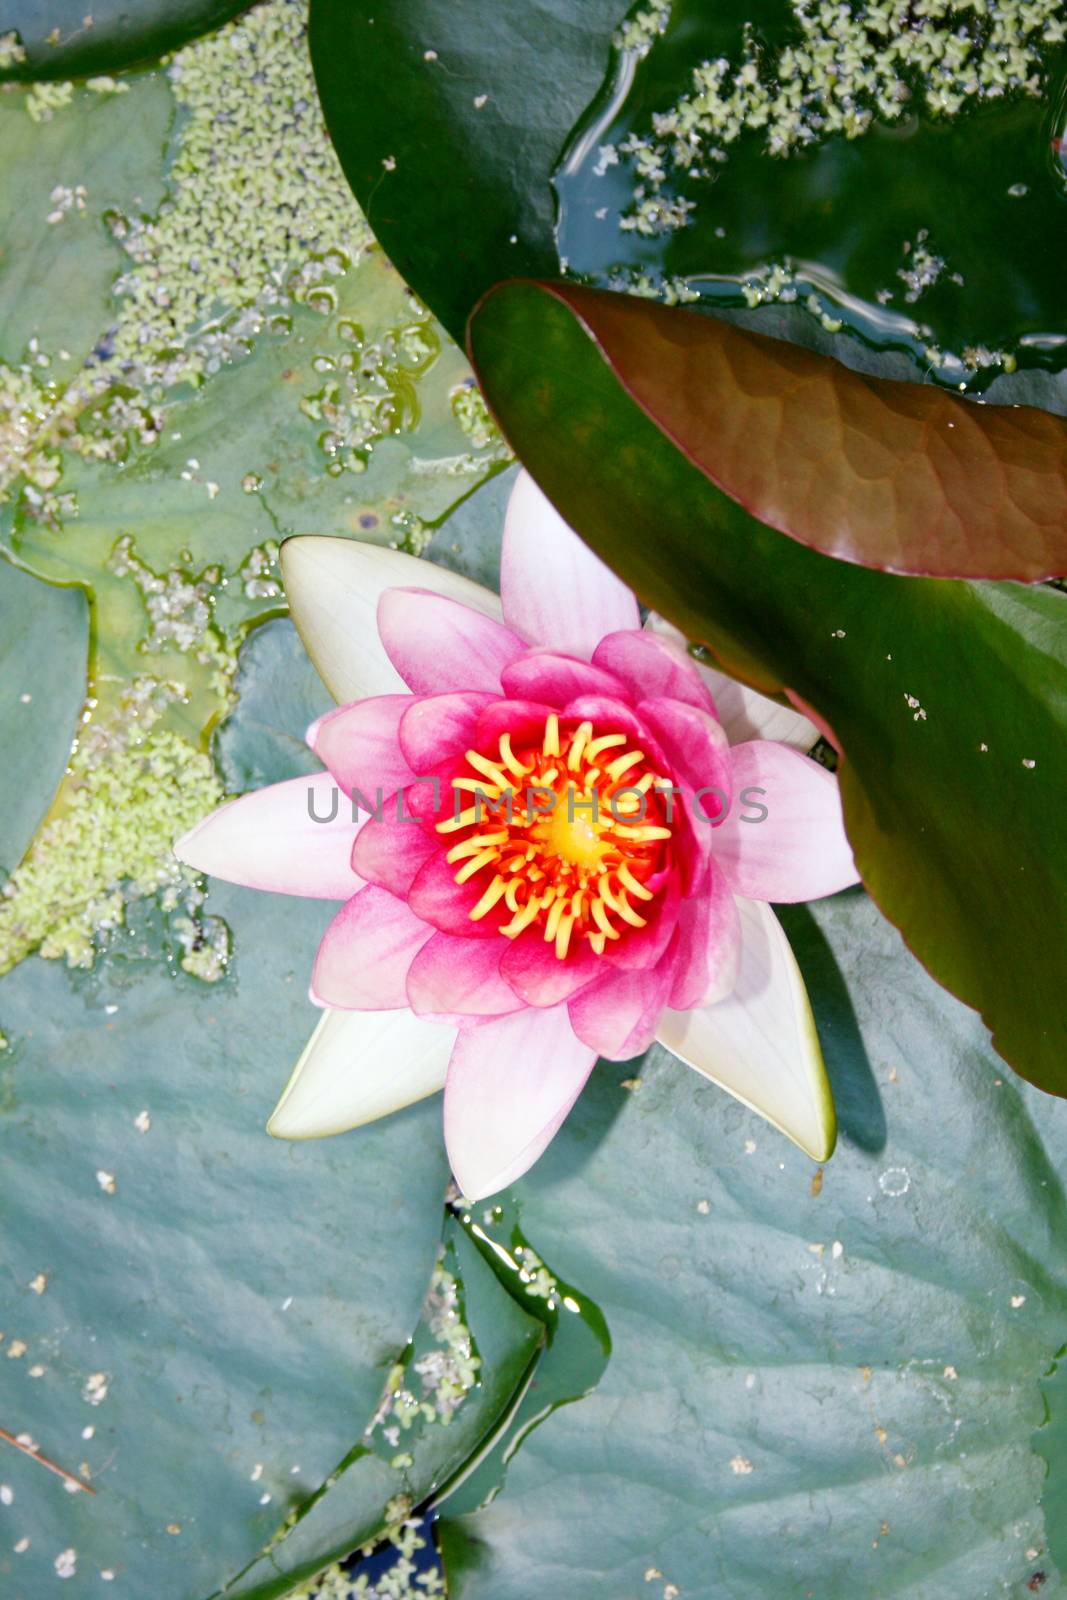 The flower of a white water lily (Nymphaea alba)